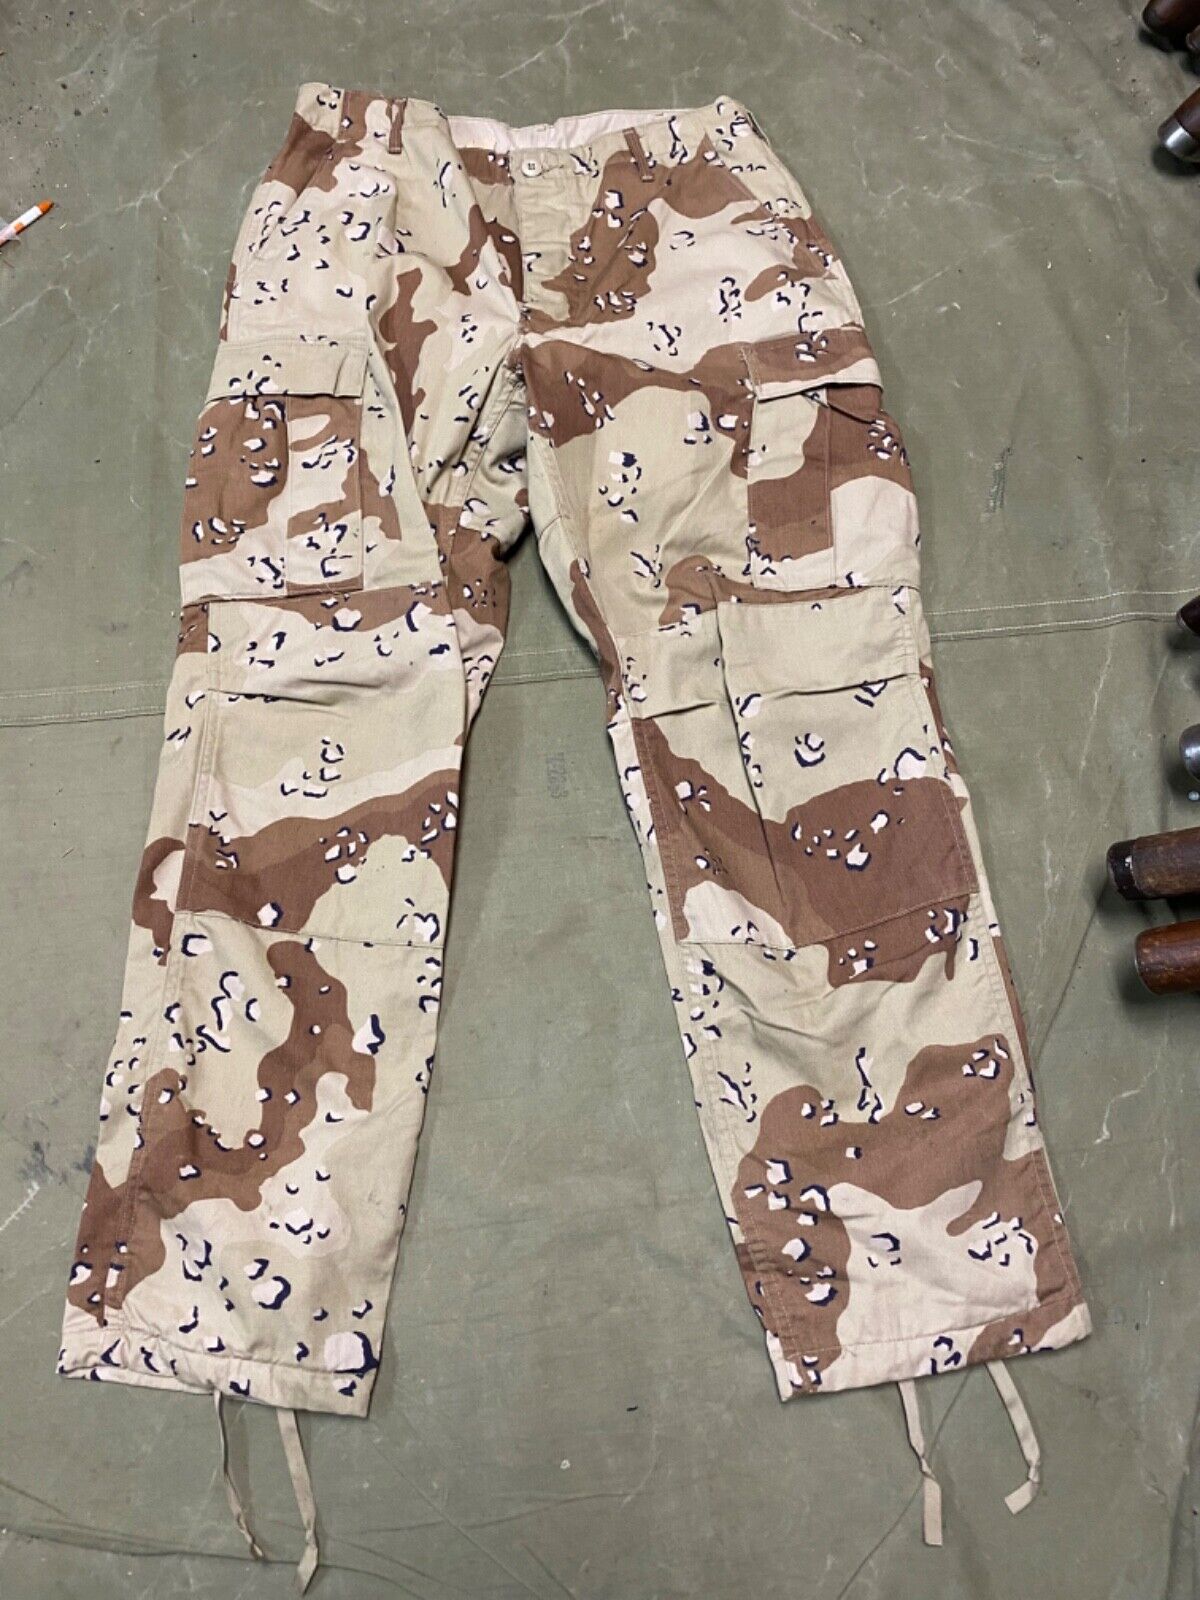 ORIGINAL DESERT STORM US ARMY CHOCOLATE CHIP CAMO TROUSERS-LARGE 36 WASIT